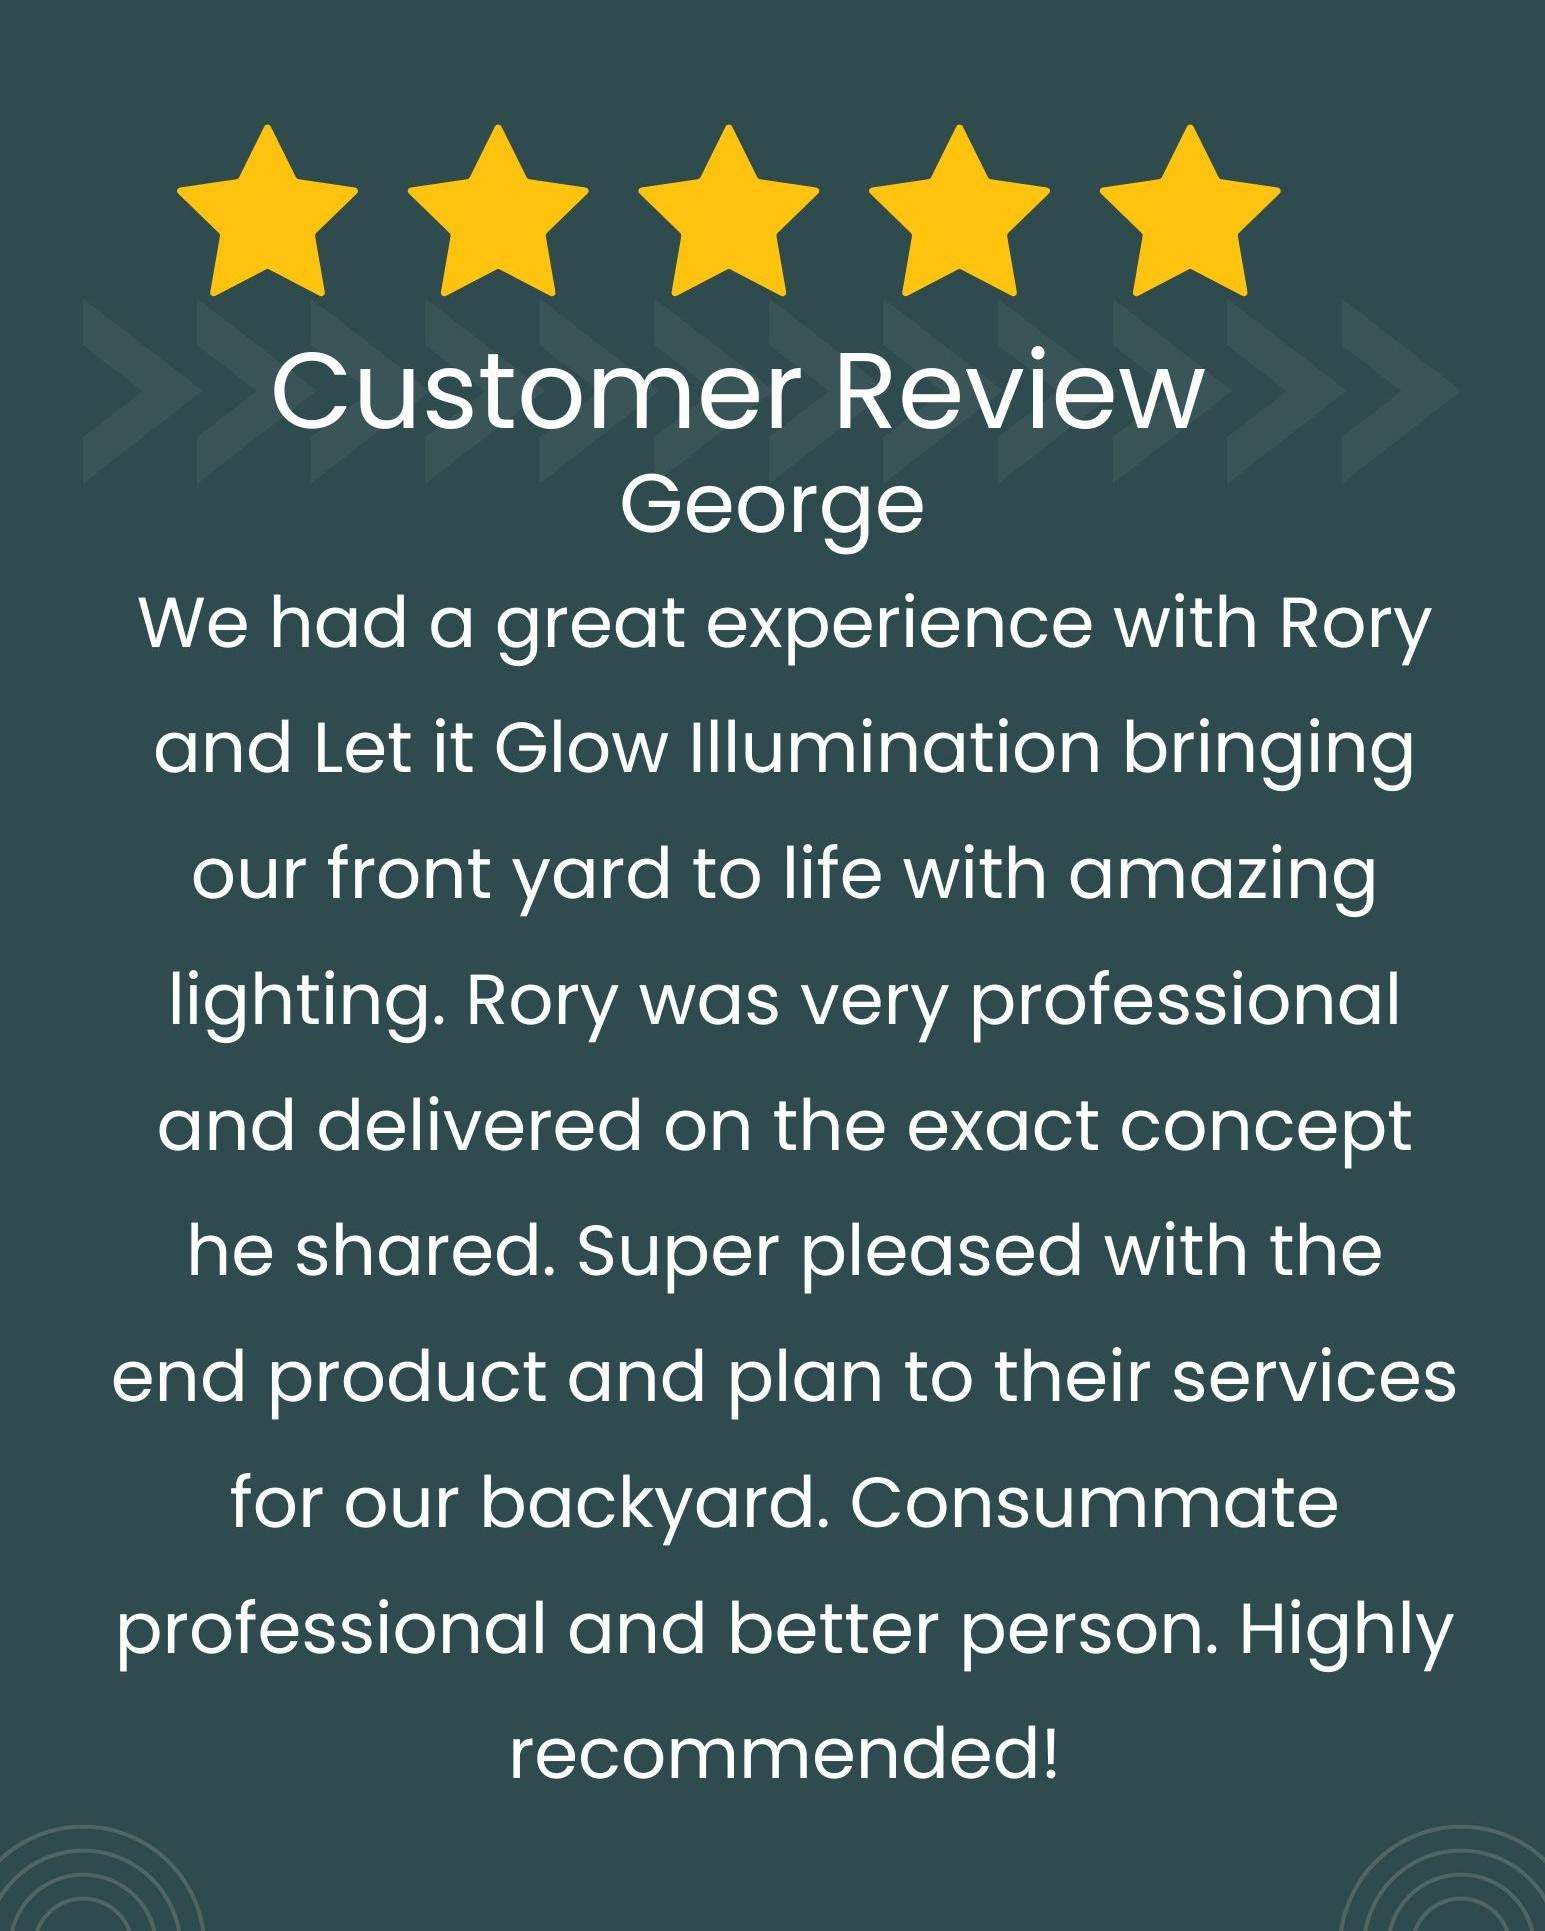 🥰 We love getting more 5 Star reviews from our amazing clients! Thank you George! 

🫵 Call Today if you are interested in a landscape lighting demonstration at your home. 📞

www.letitglowillumination.com